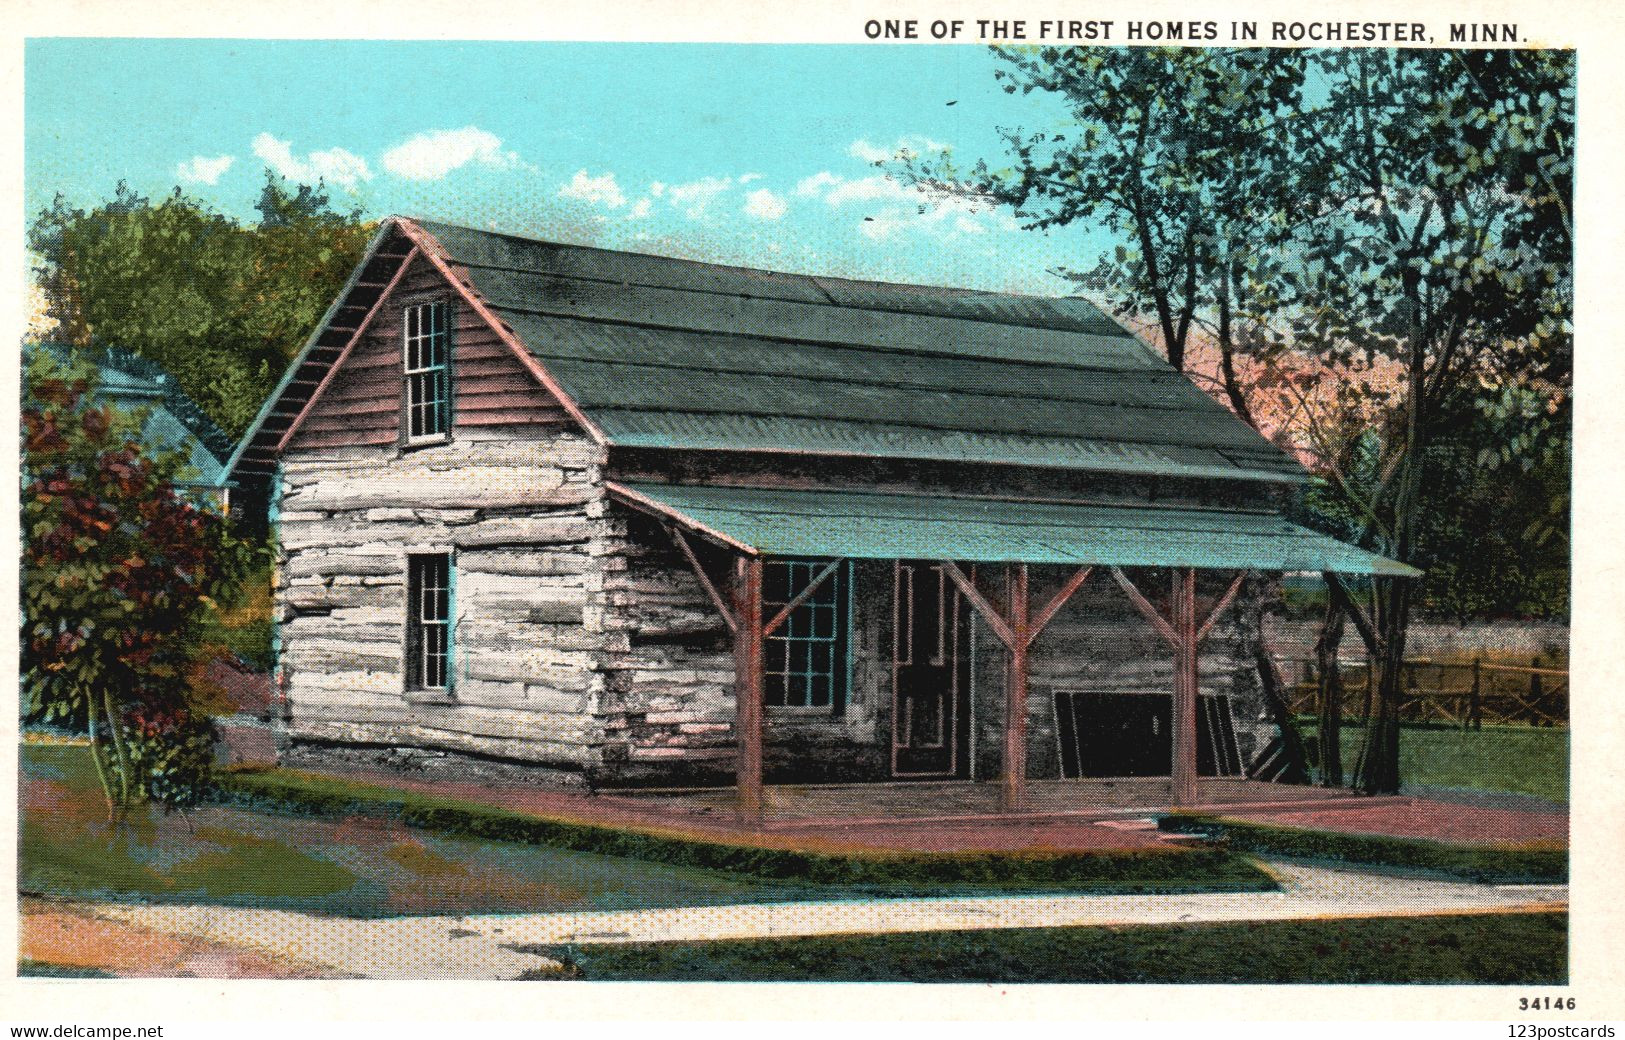 One Of The First Homes In Rochester, Minnesota - Rochester